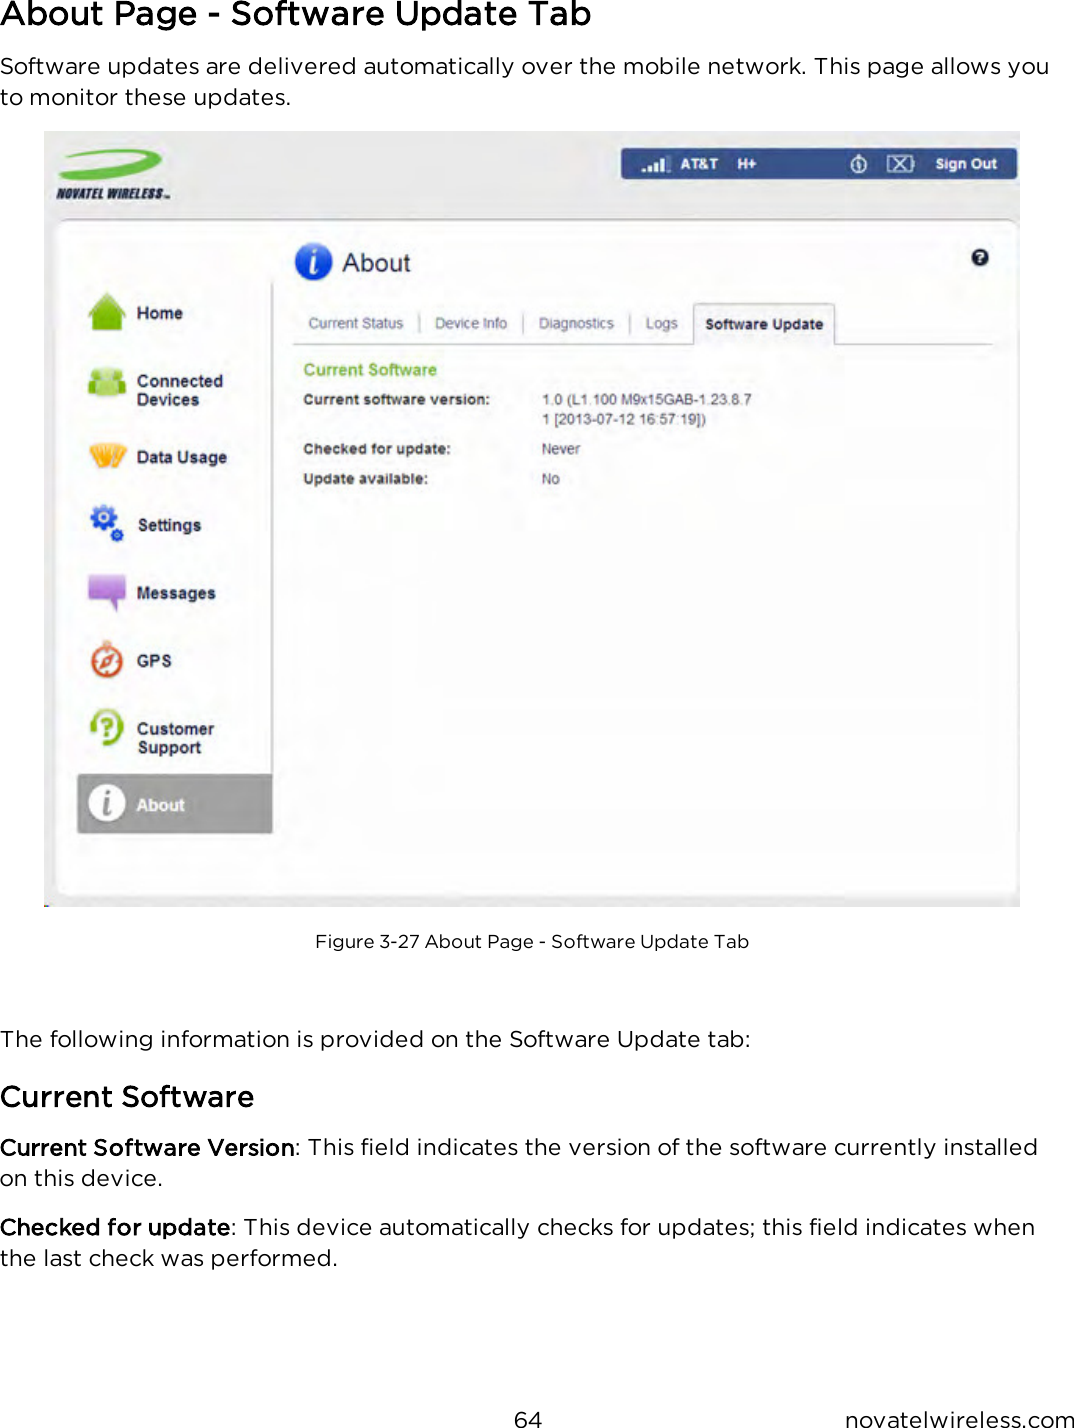 64 novatelwireless.comAbout Page - Software Update TabSoftware updates are delivered automatically over the mobile network. This page allows youto monitor these updates.Figure 3-27 About Page - Software Update TabThe following information is provided on the Software Update tab:Current SoftwareCurrent Software Version: This field indicates the version of the software currently installedon this device.Checked for update: This device automatically checks for updates; this field indicates whenthe last check was performed.